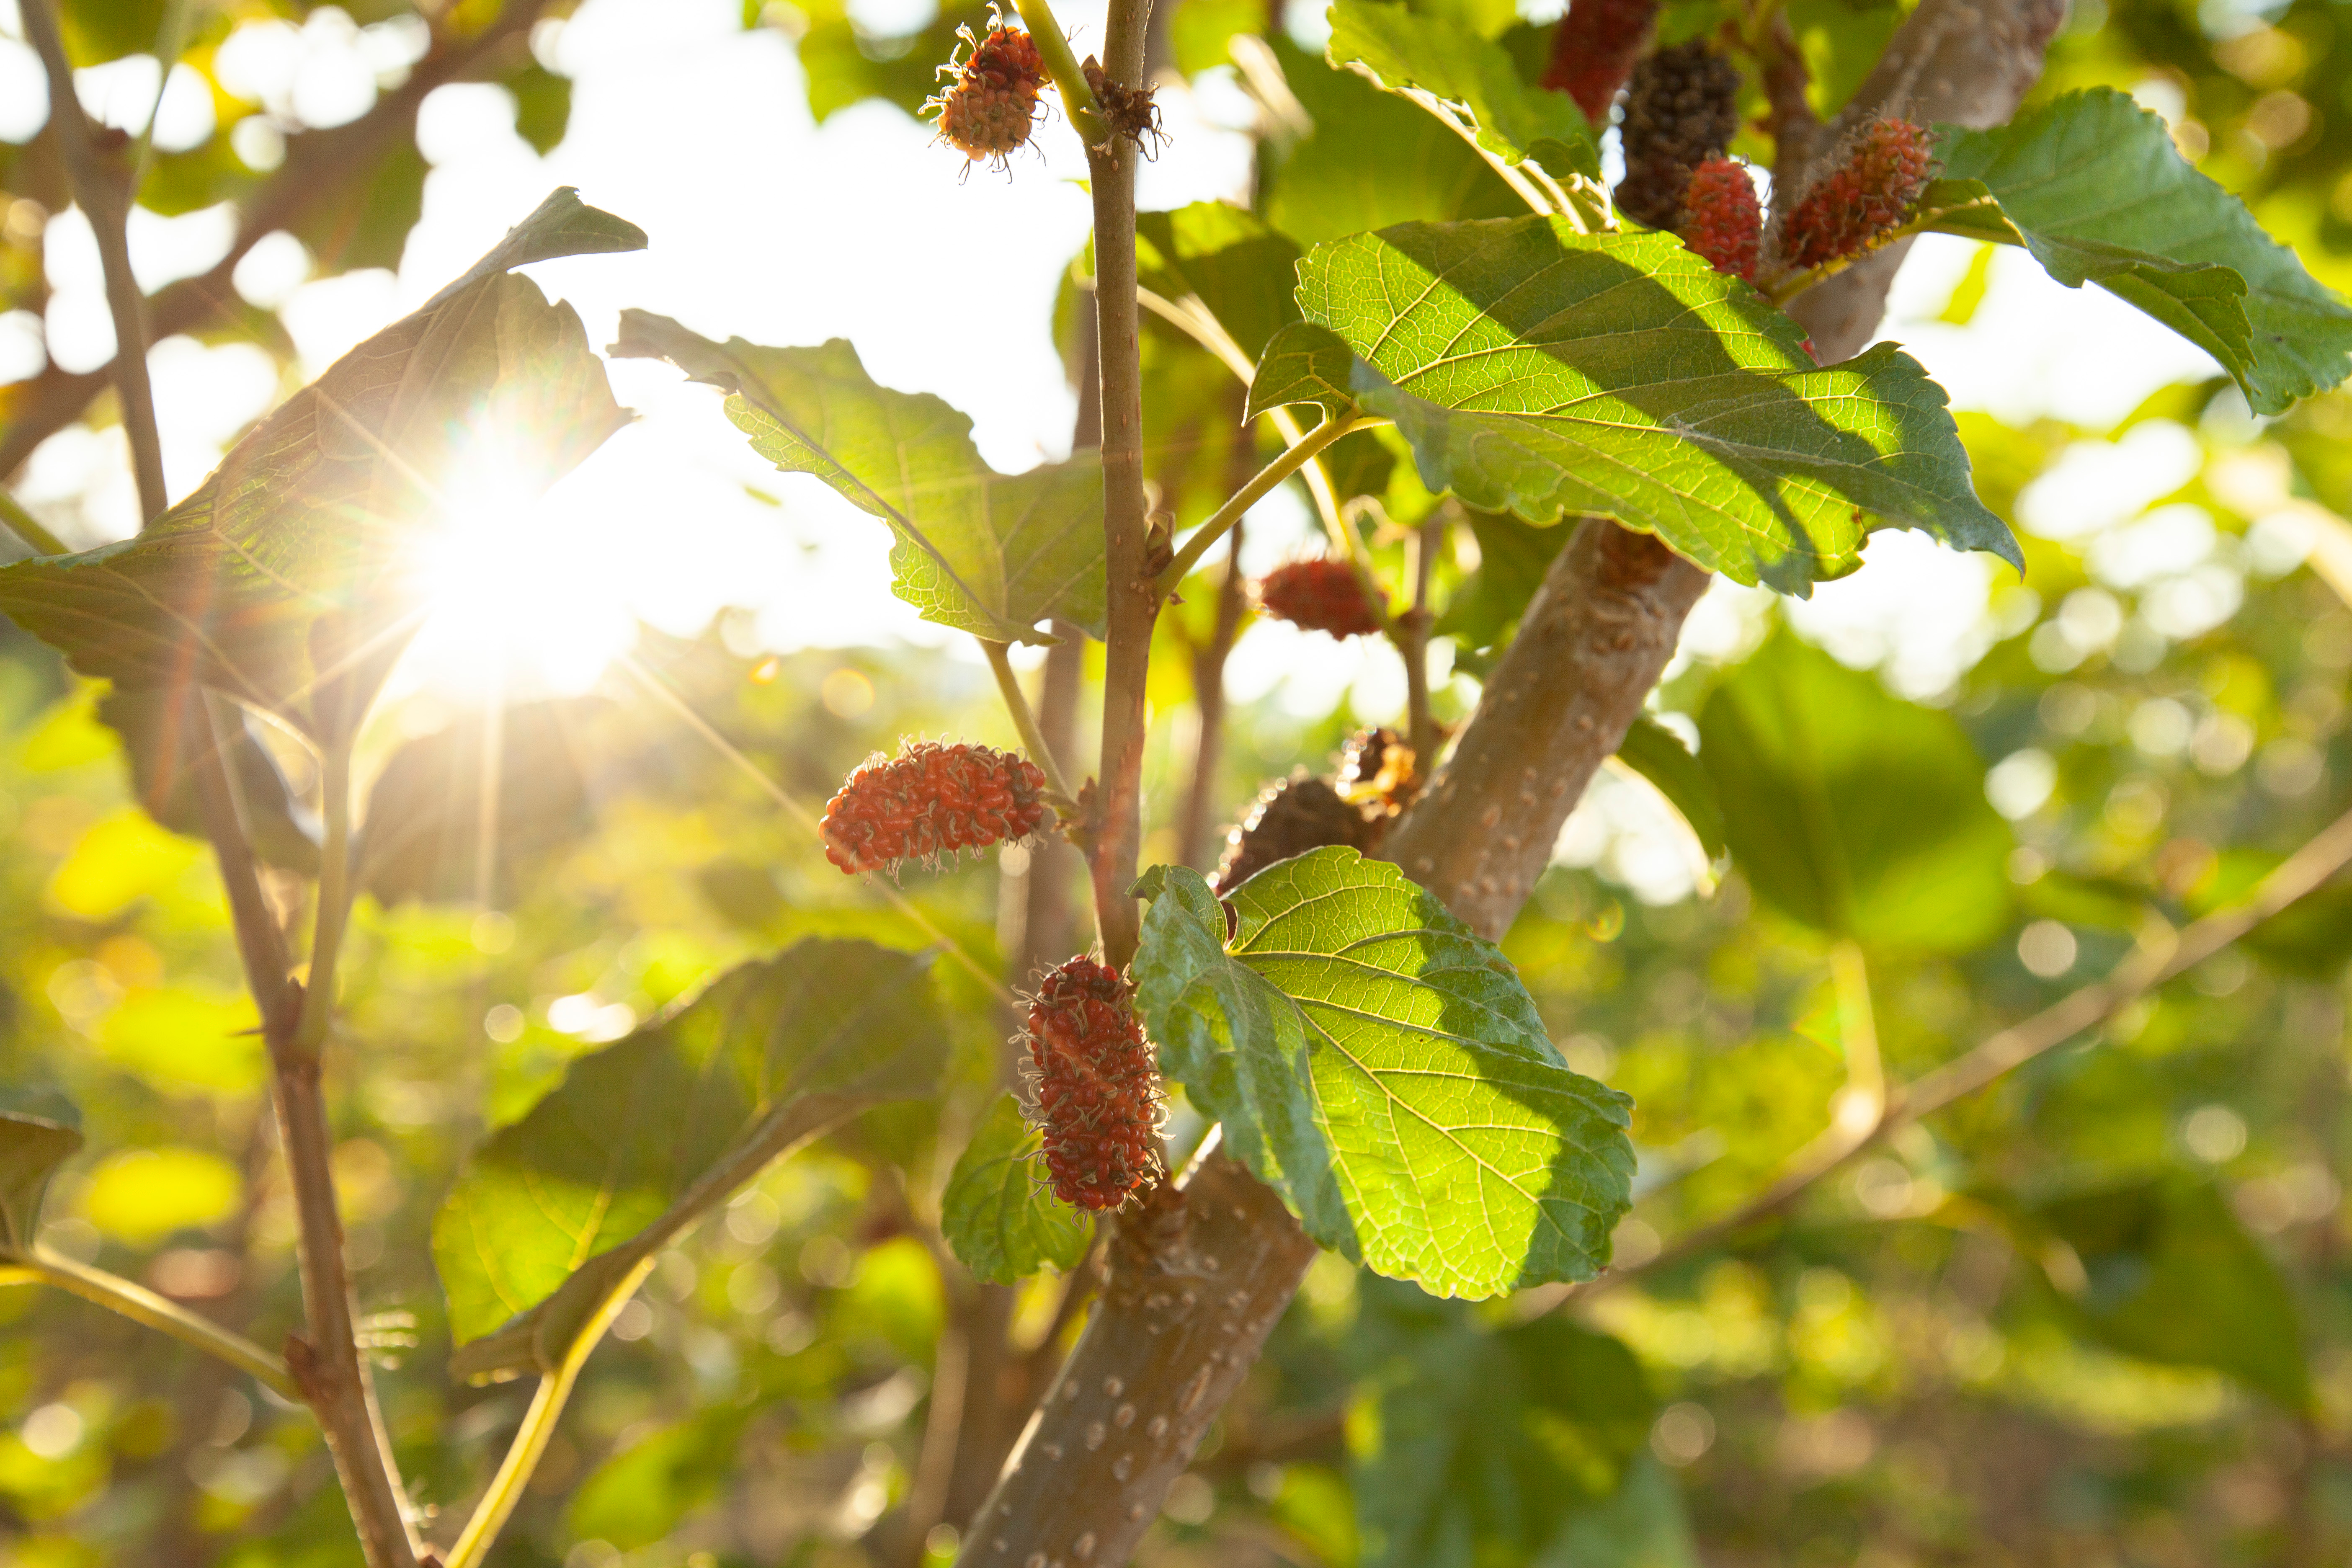 Flowering fruit of the mulberry tree © pornpawit / Shutterstock